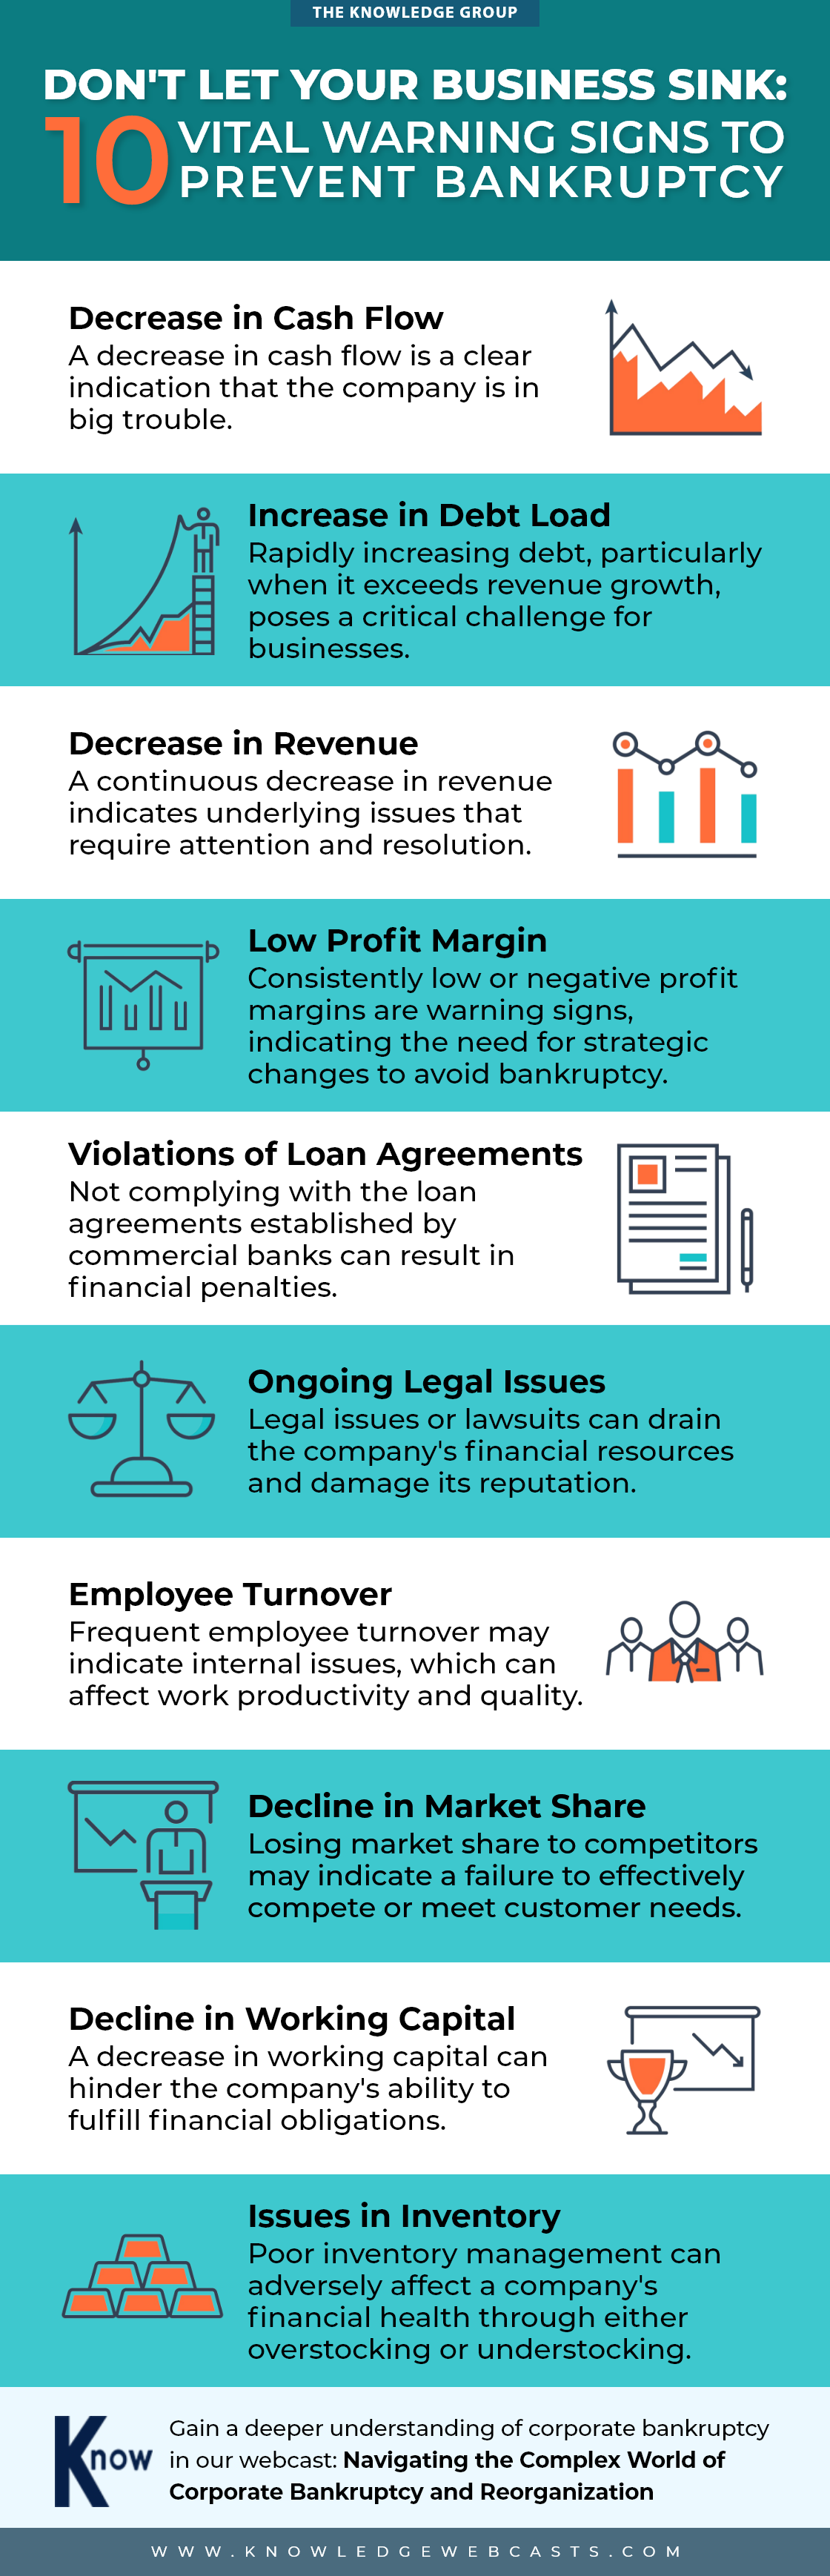 bankruptcy,prevention,10 warning signs,business,early signs